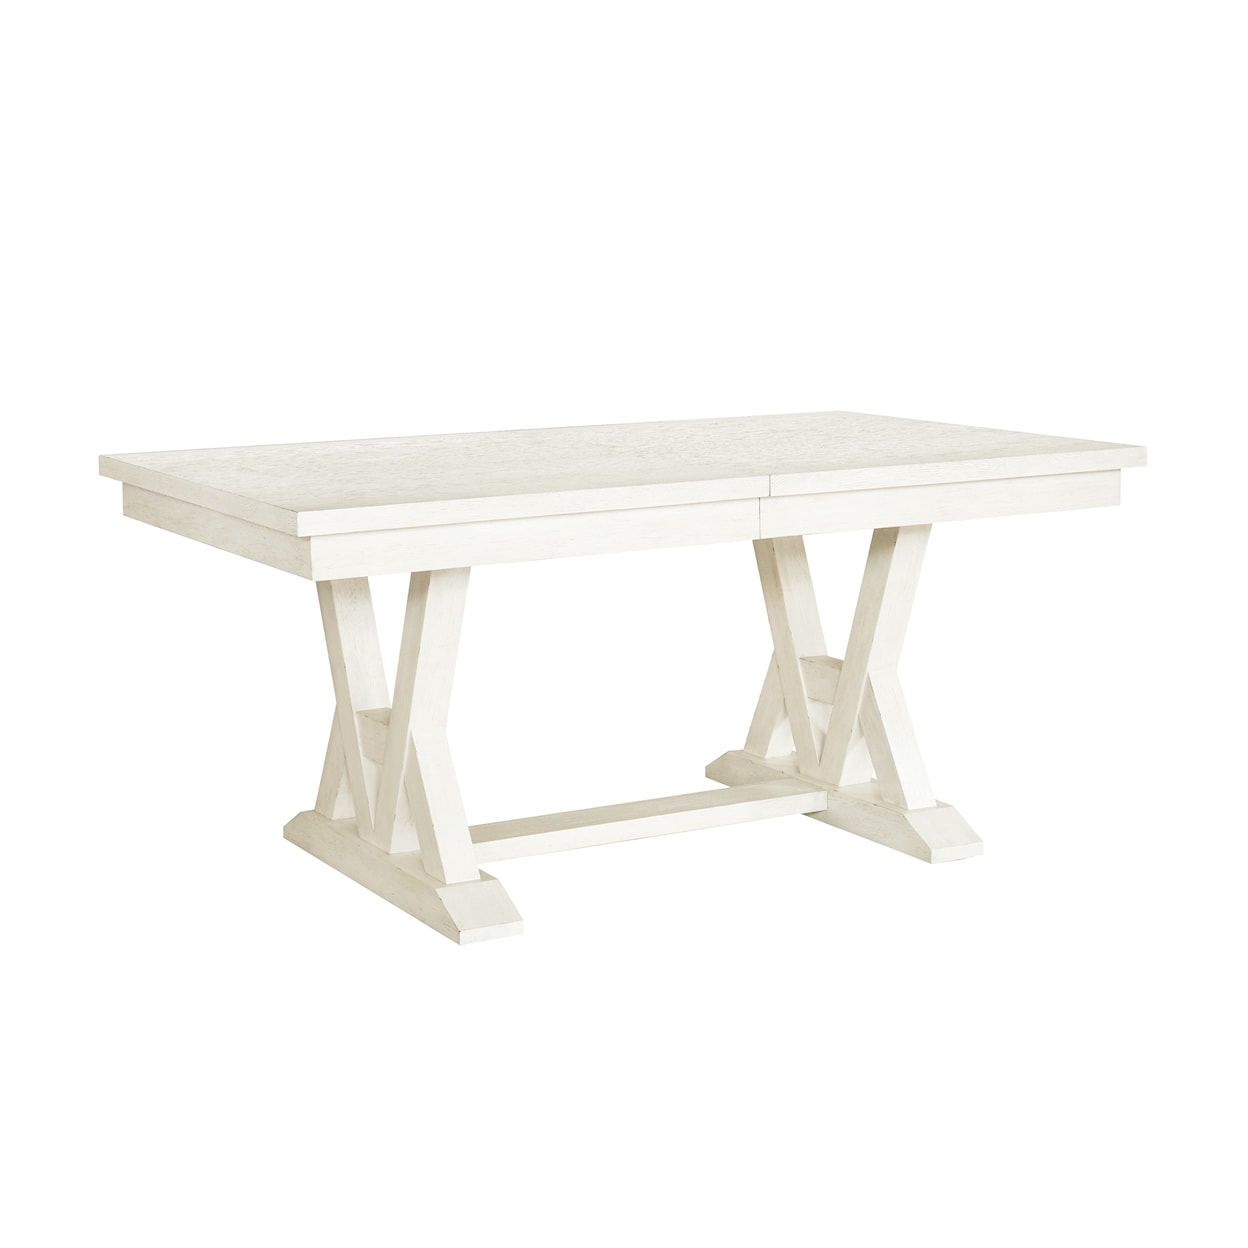 Samuel Lawrence Maggie Valley Trestle Dining Table